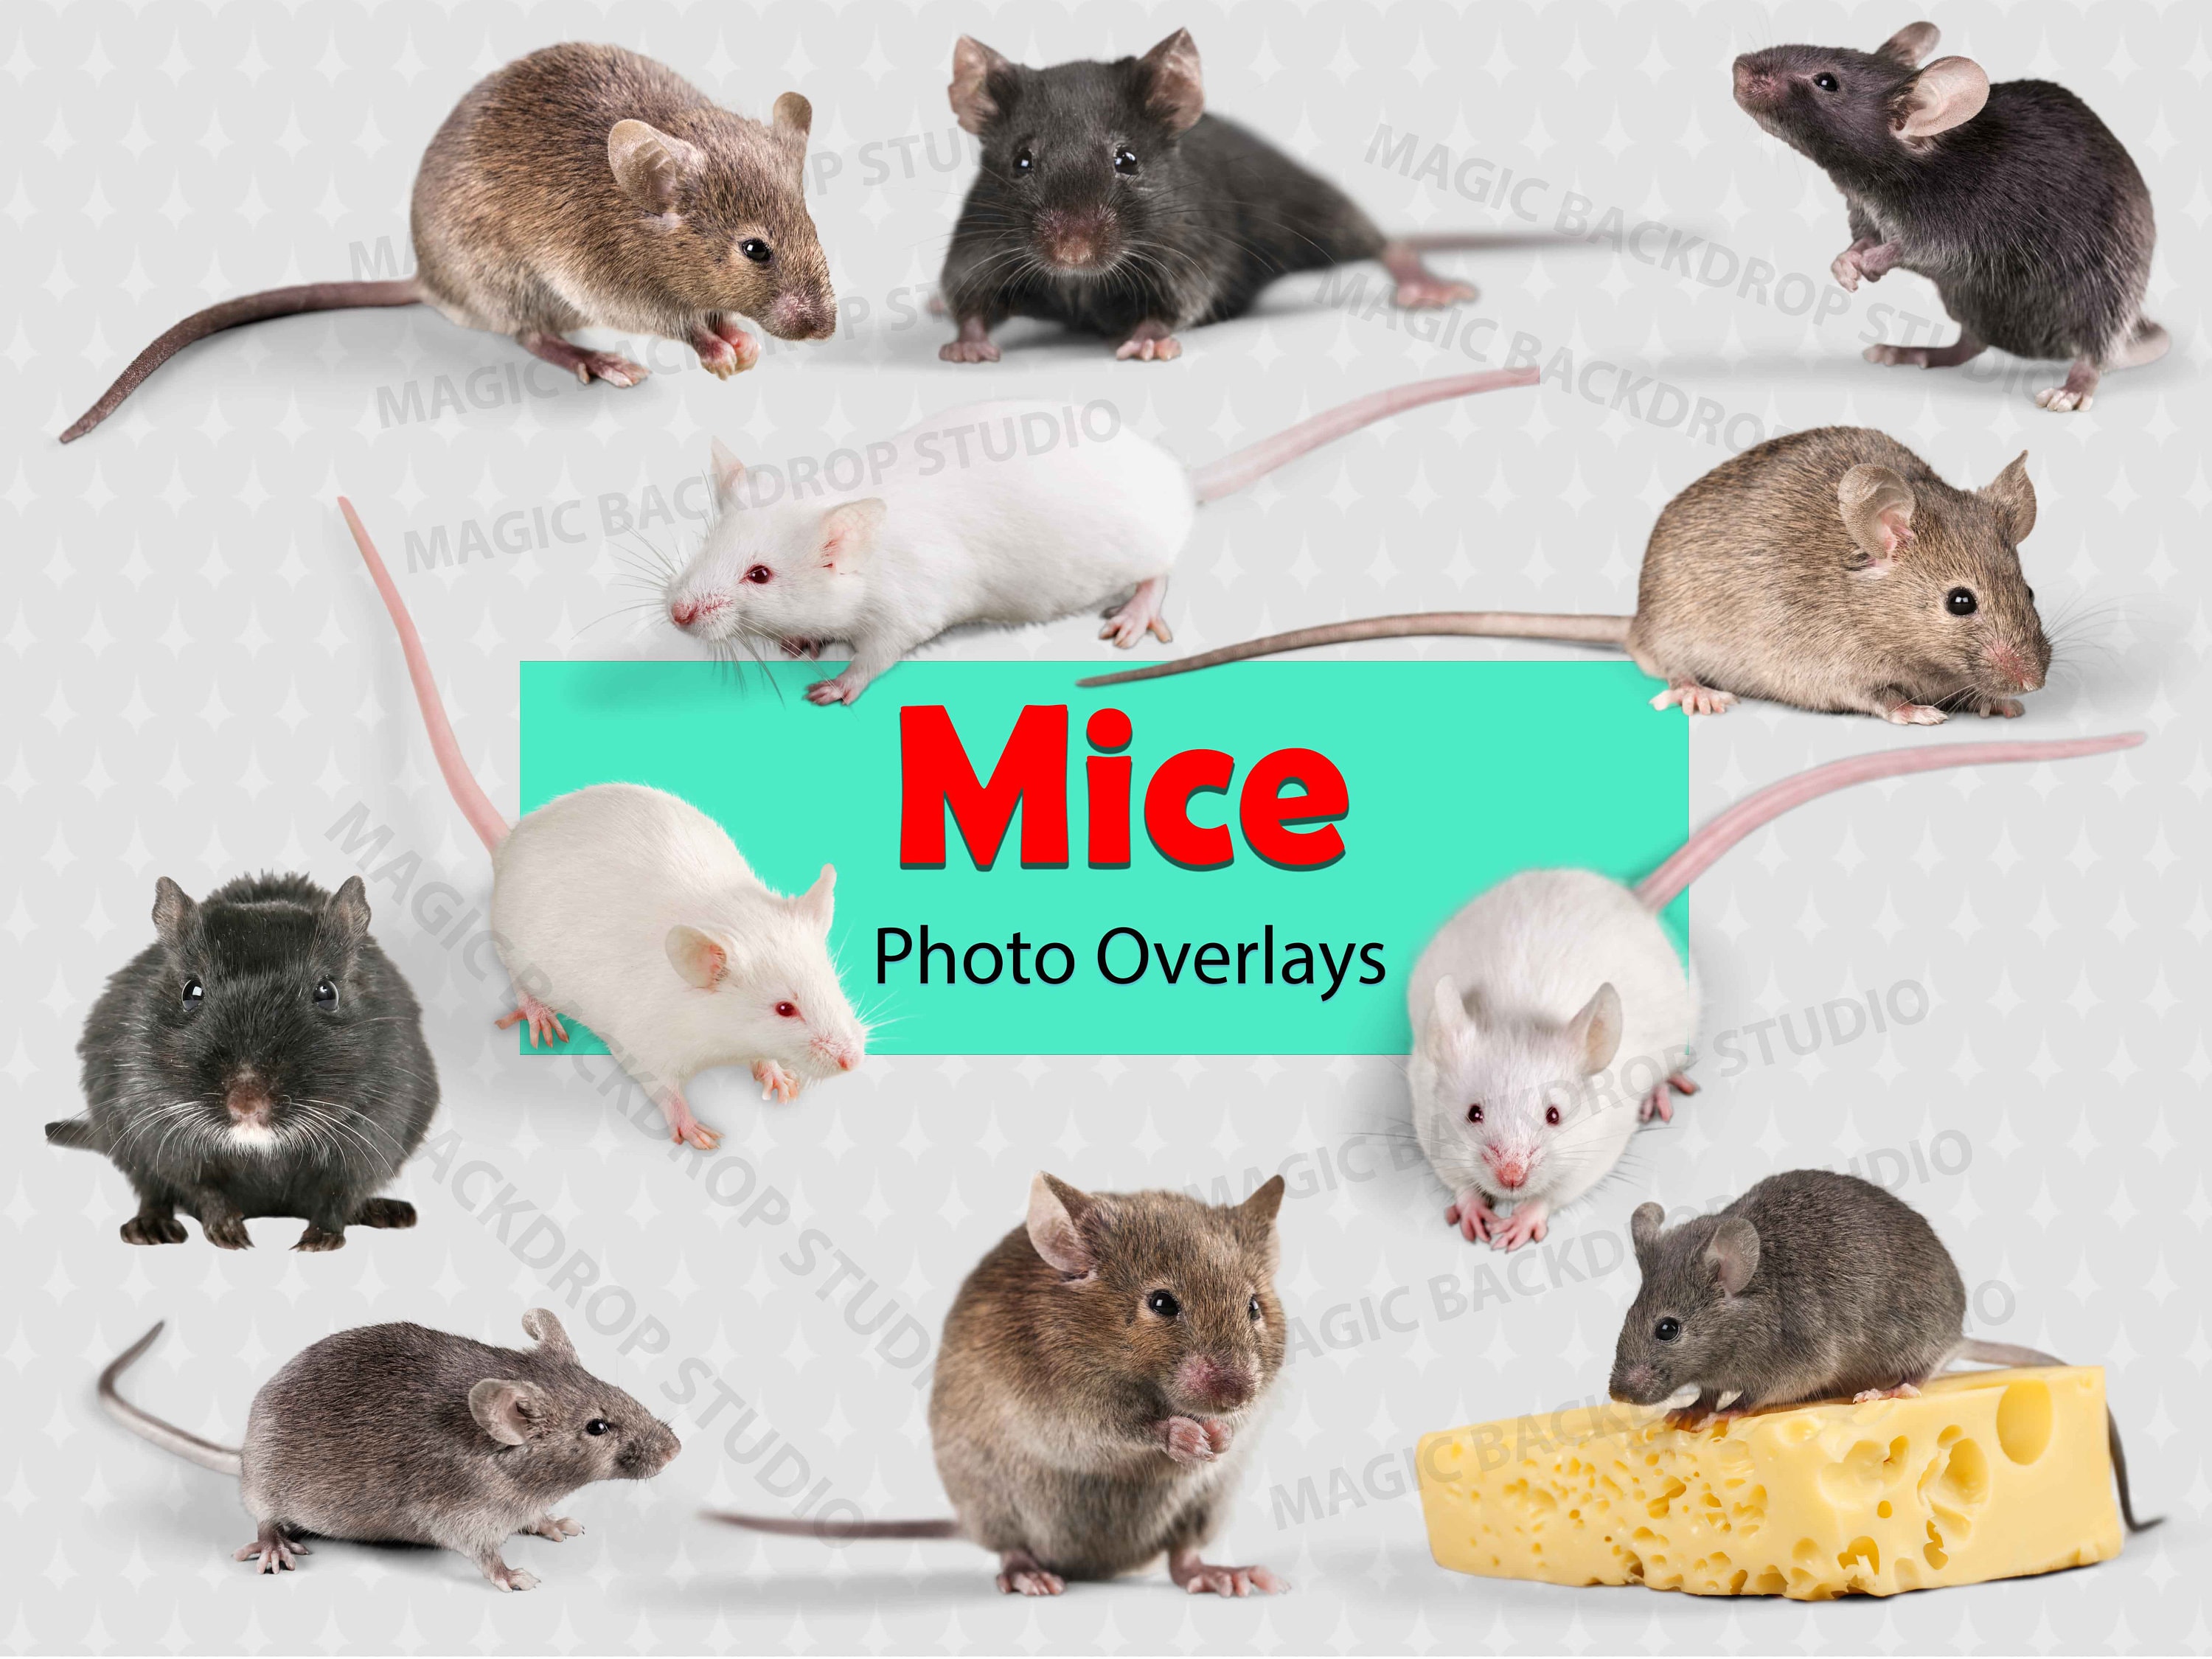 2PC Large Jumbo Size Glue Sticky Mouse Rat Mice Traps Rodent Disposable  Tray 